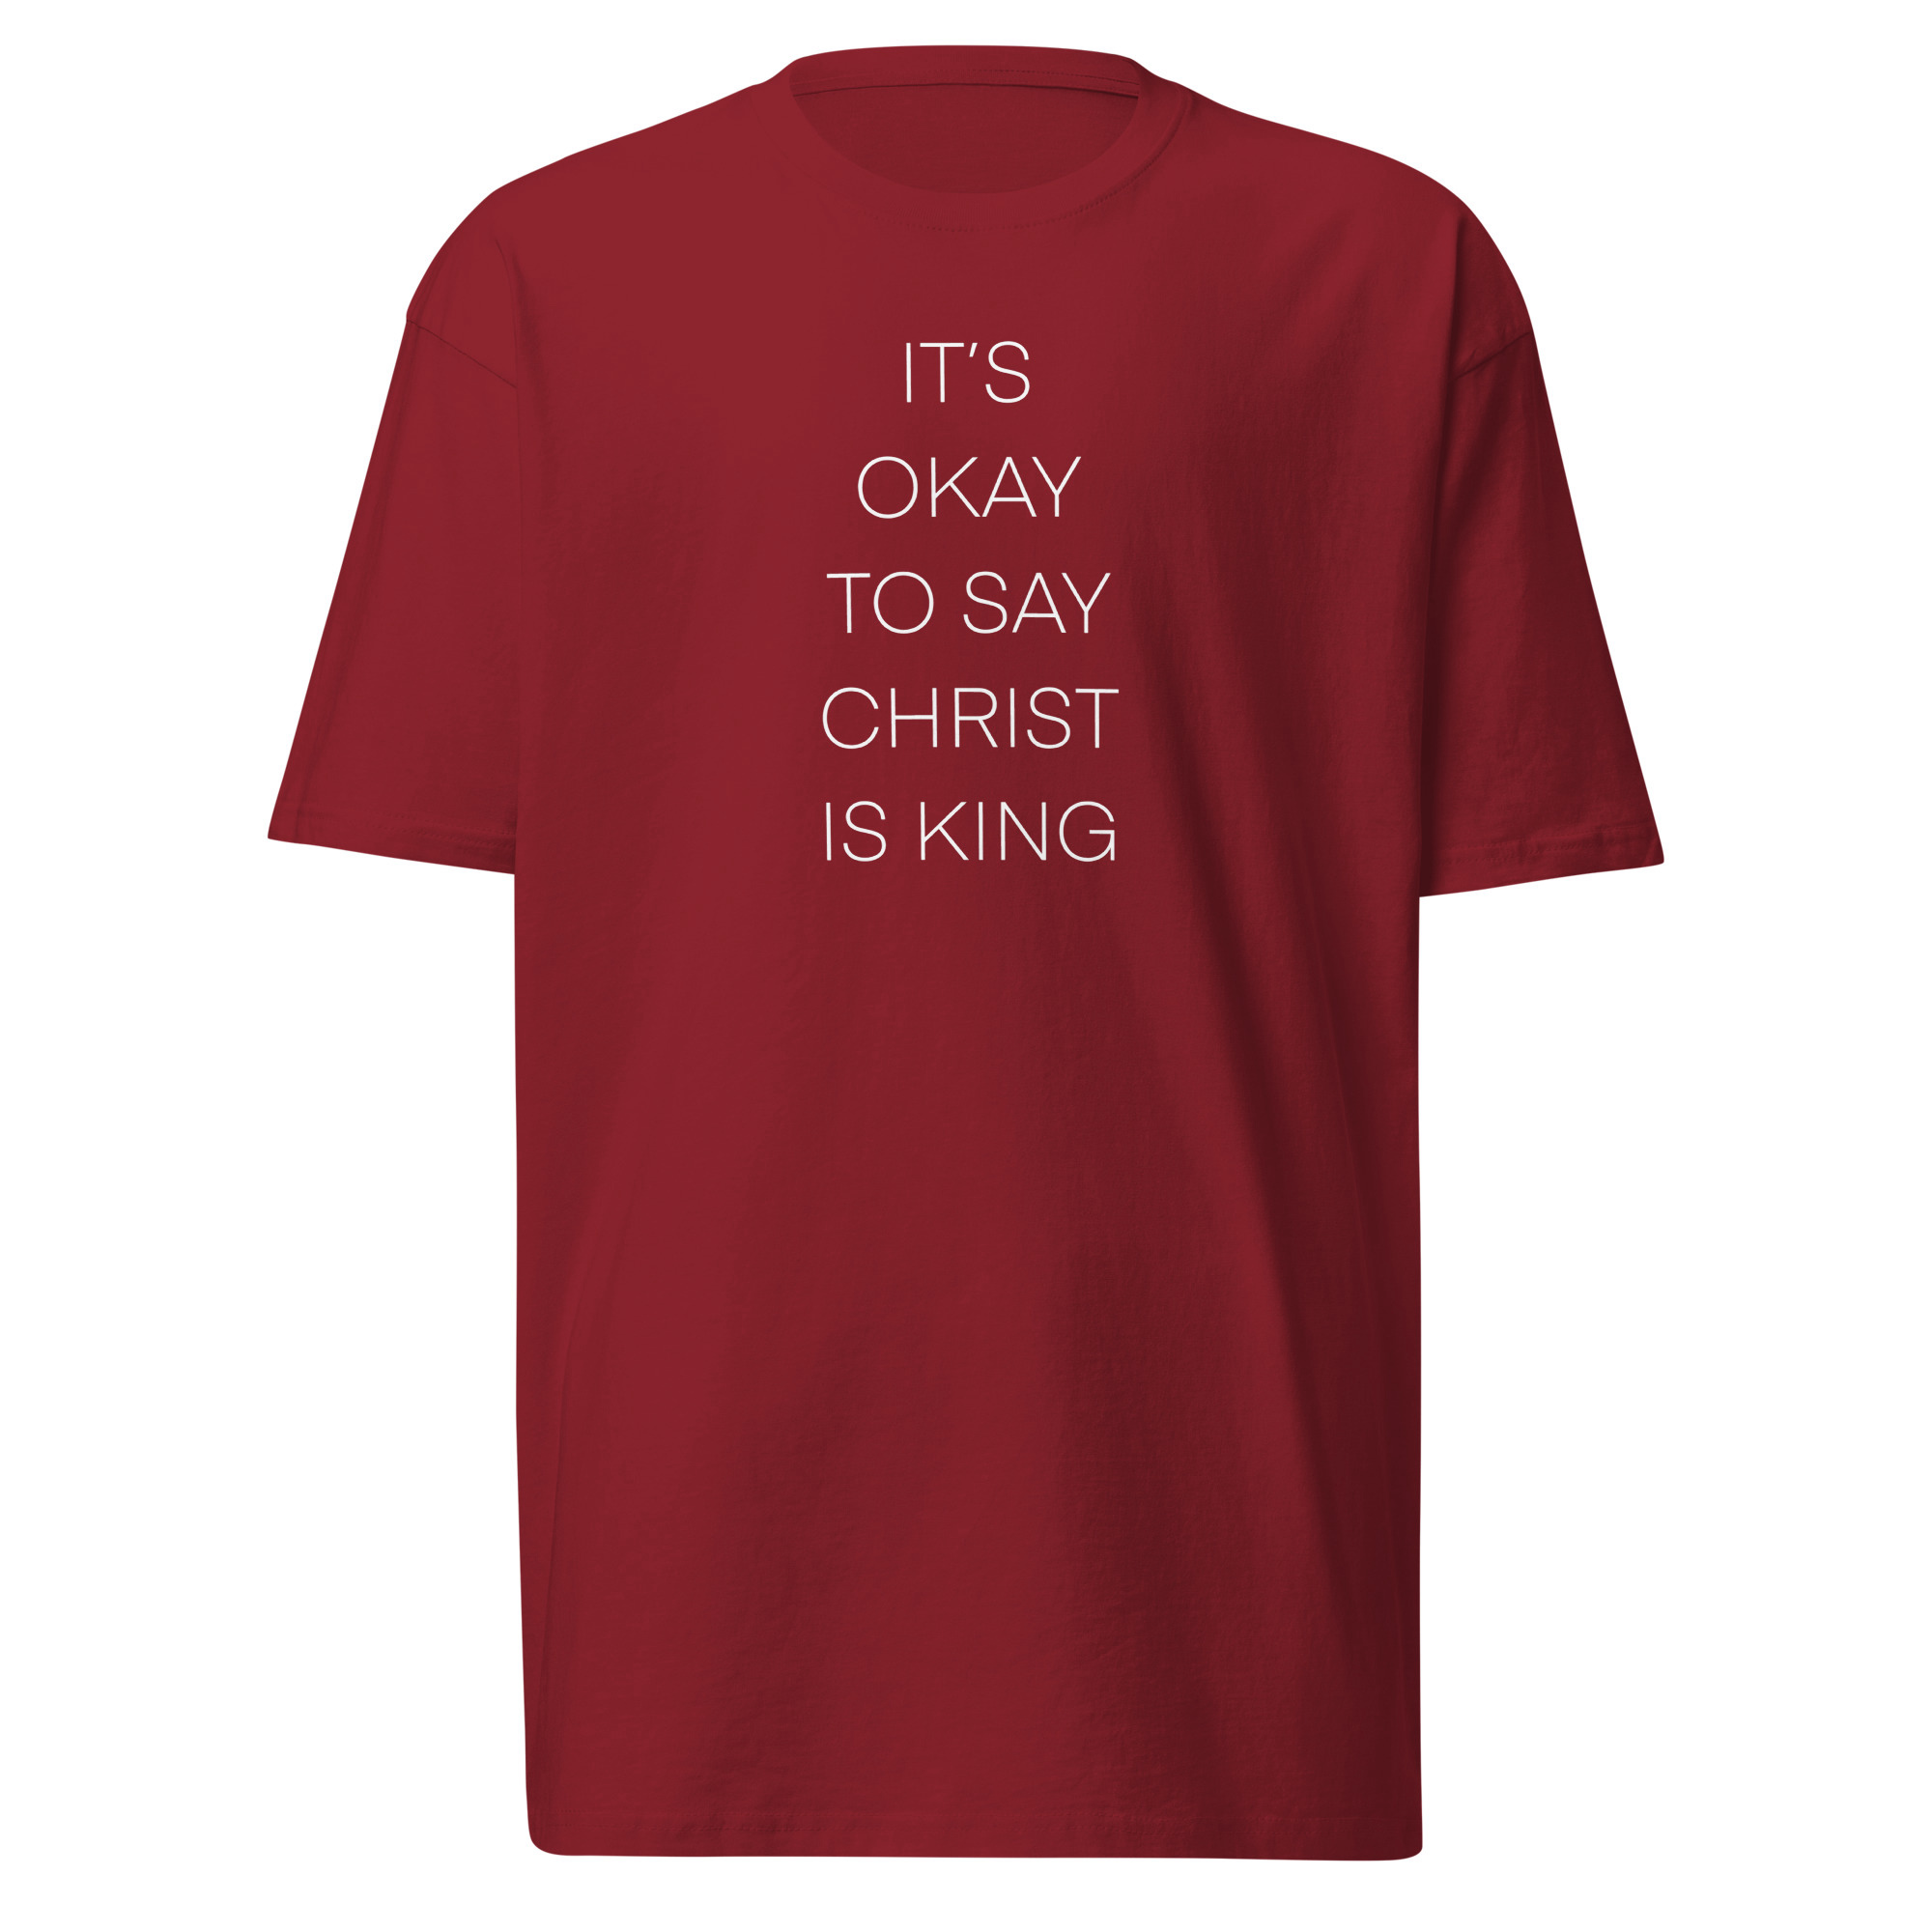 It's Okay To Say Christ Is King T-Shirt - Brick Red / XL